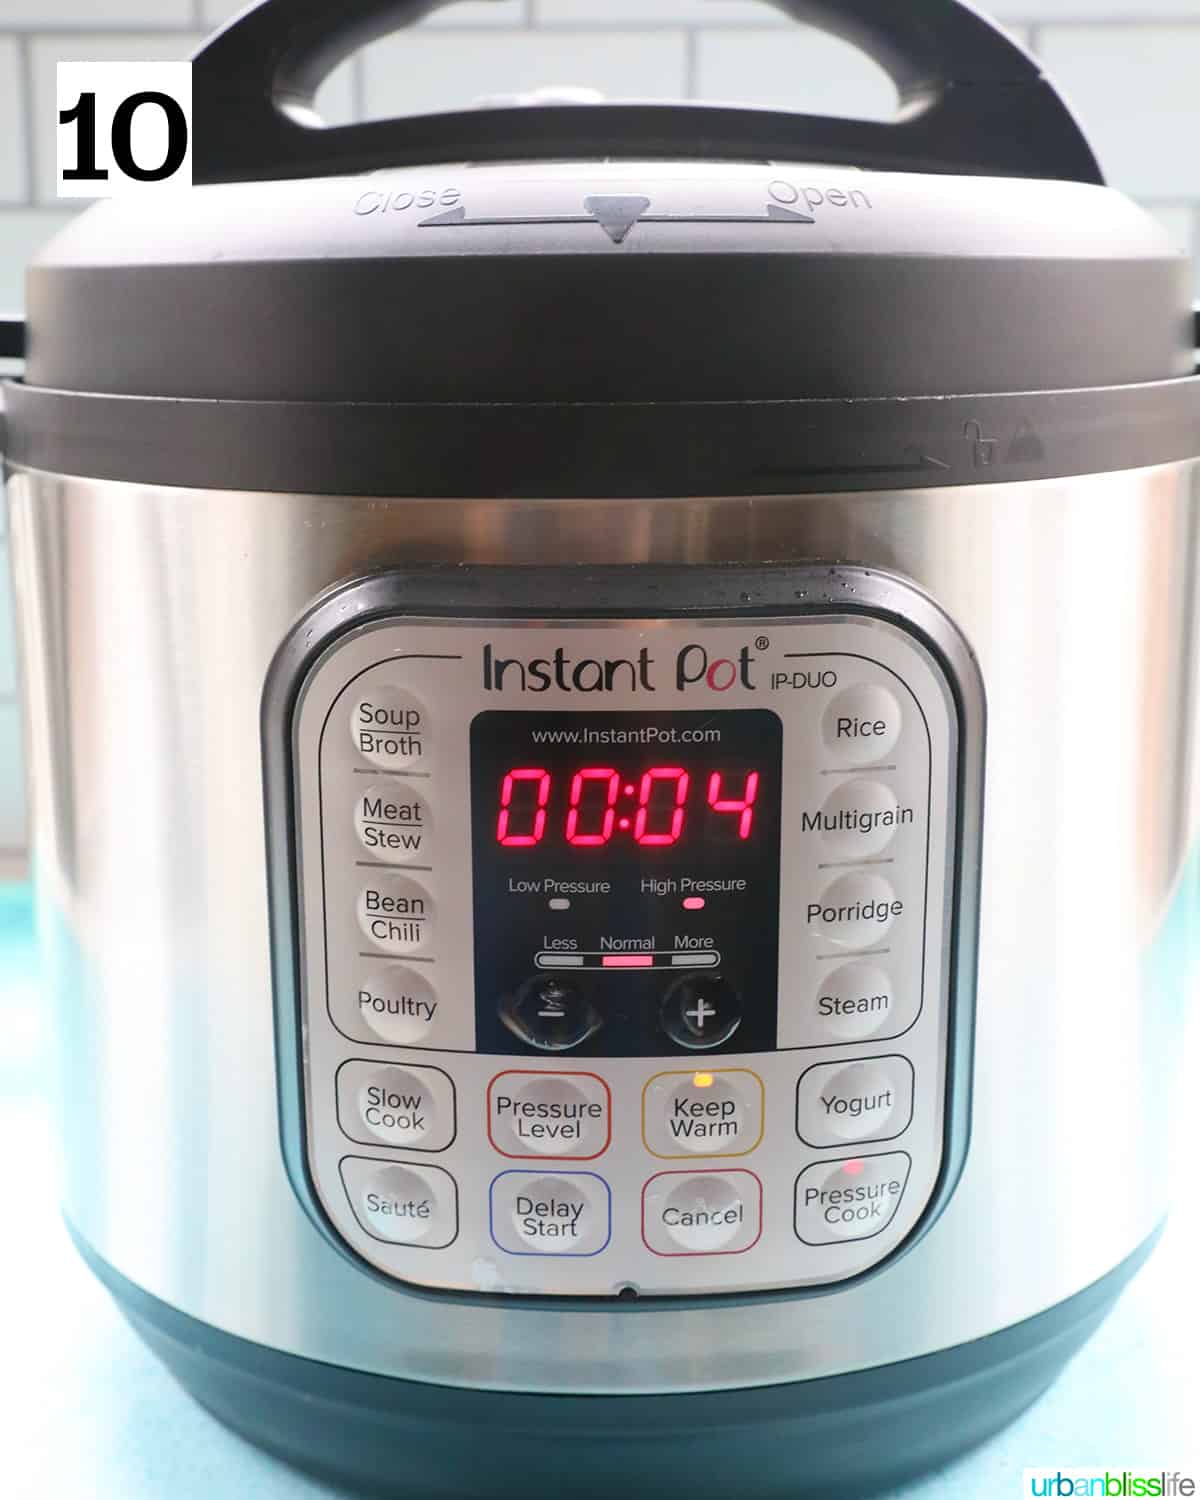 Instant Pot set to pressure cook on high for 4 minutes.